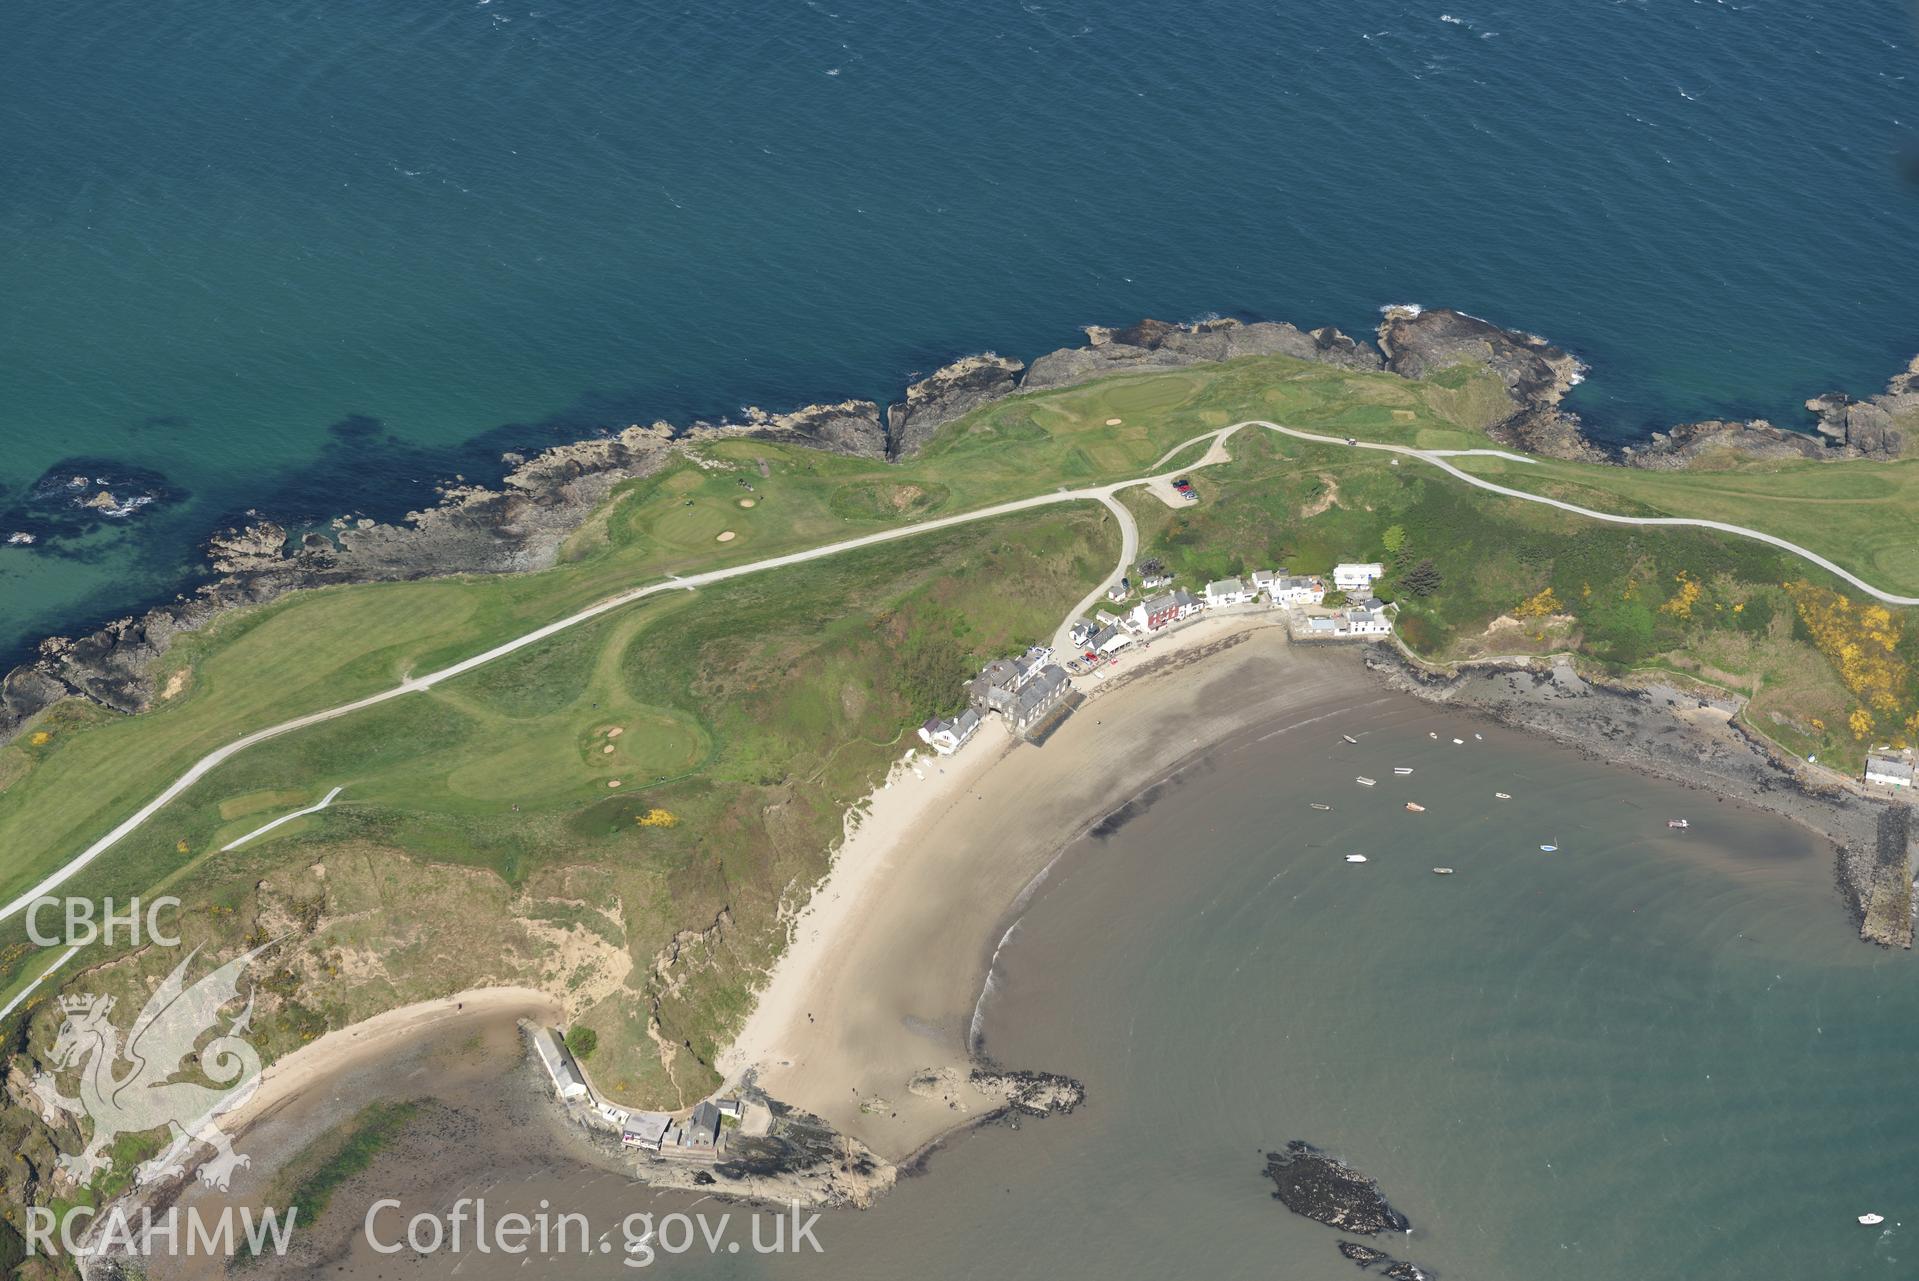 Aerial photography of Trwyn Porth Dinllaen taken on 3rd May 2017.  Baseline aerial reconnaissance survey for the CHERISH Project. ? Crown: CHERISH PROJECT 2017. Produced with EU funds through the Ireland Wales Co-operation Programme 2014-2020. All material made freely available through the Open Government Licence.